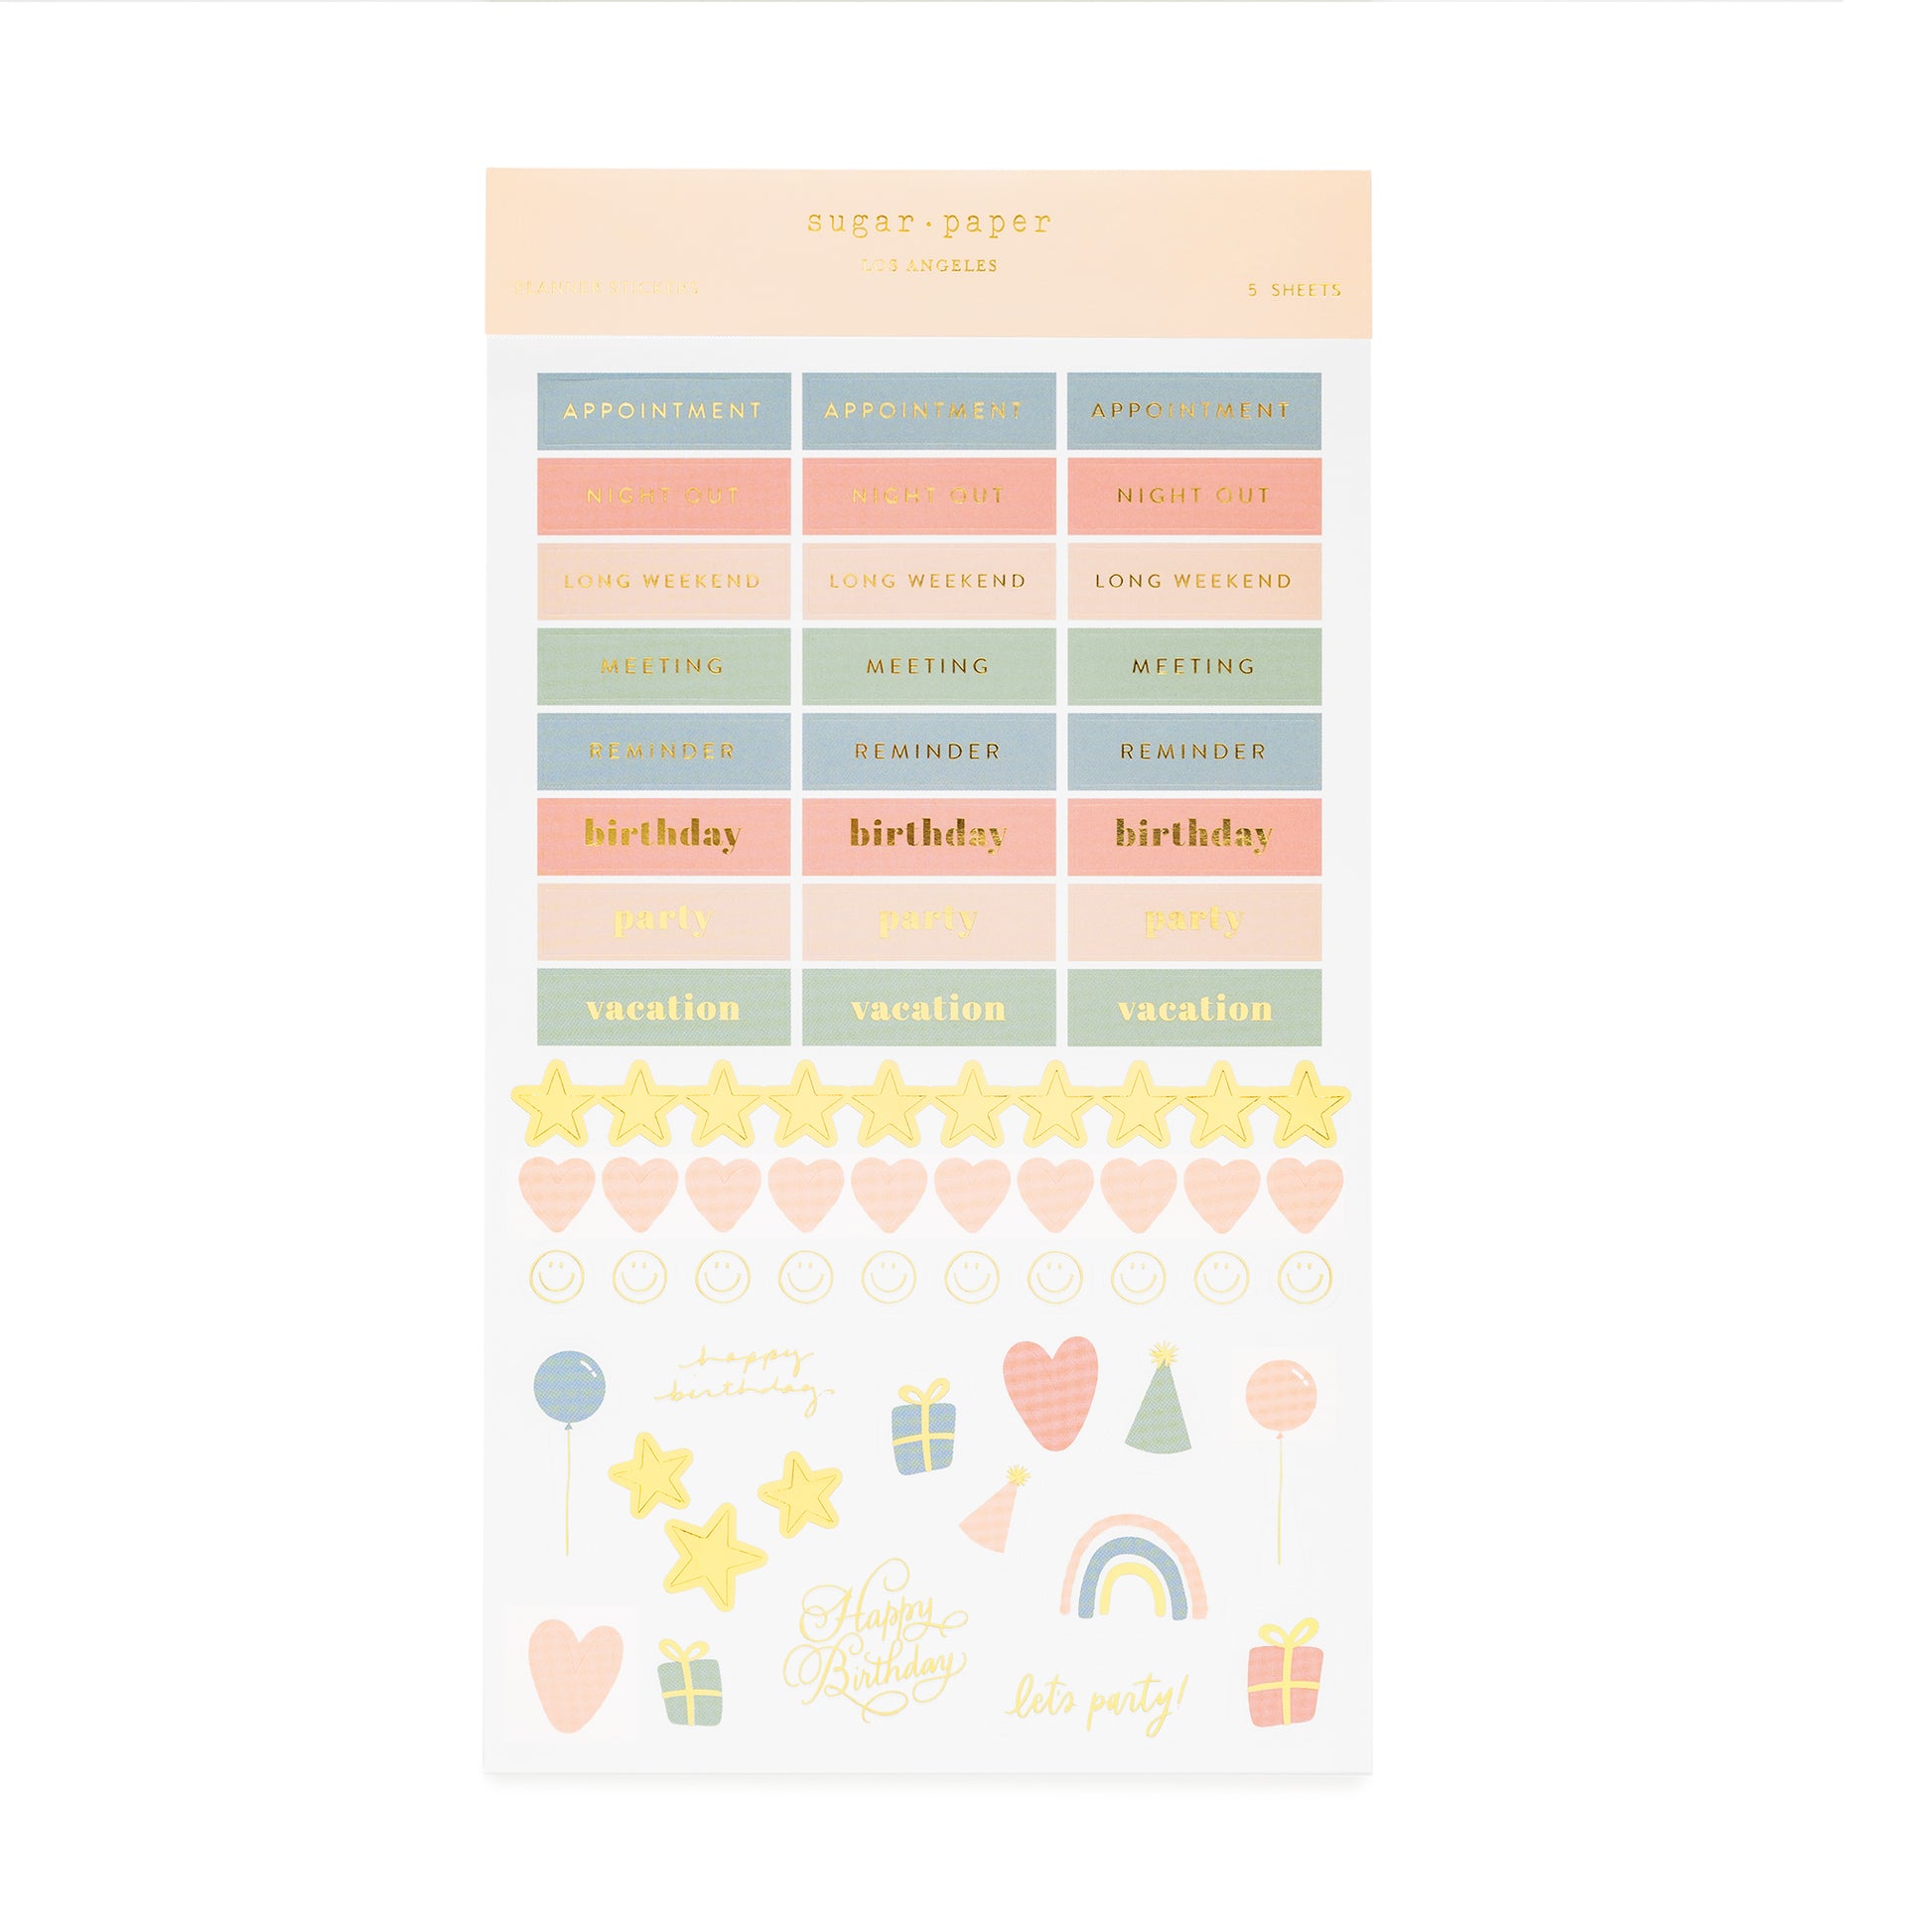 Cutee Pink Stationery Stickers - EVERYTHING CUTEE 